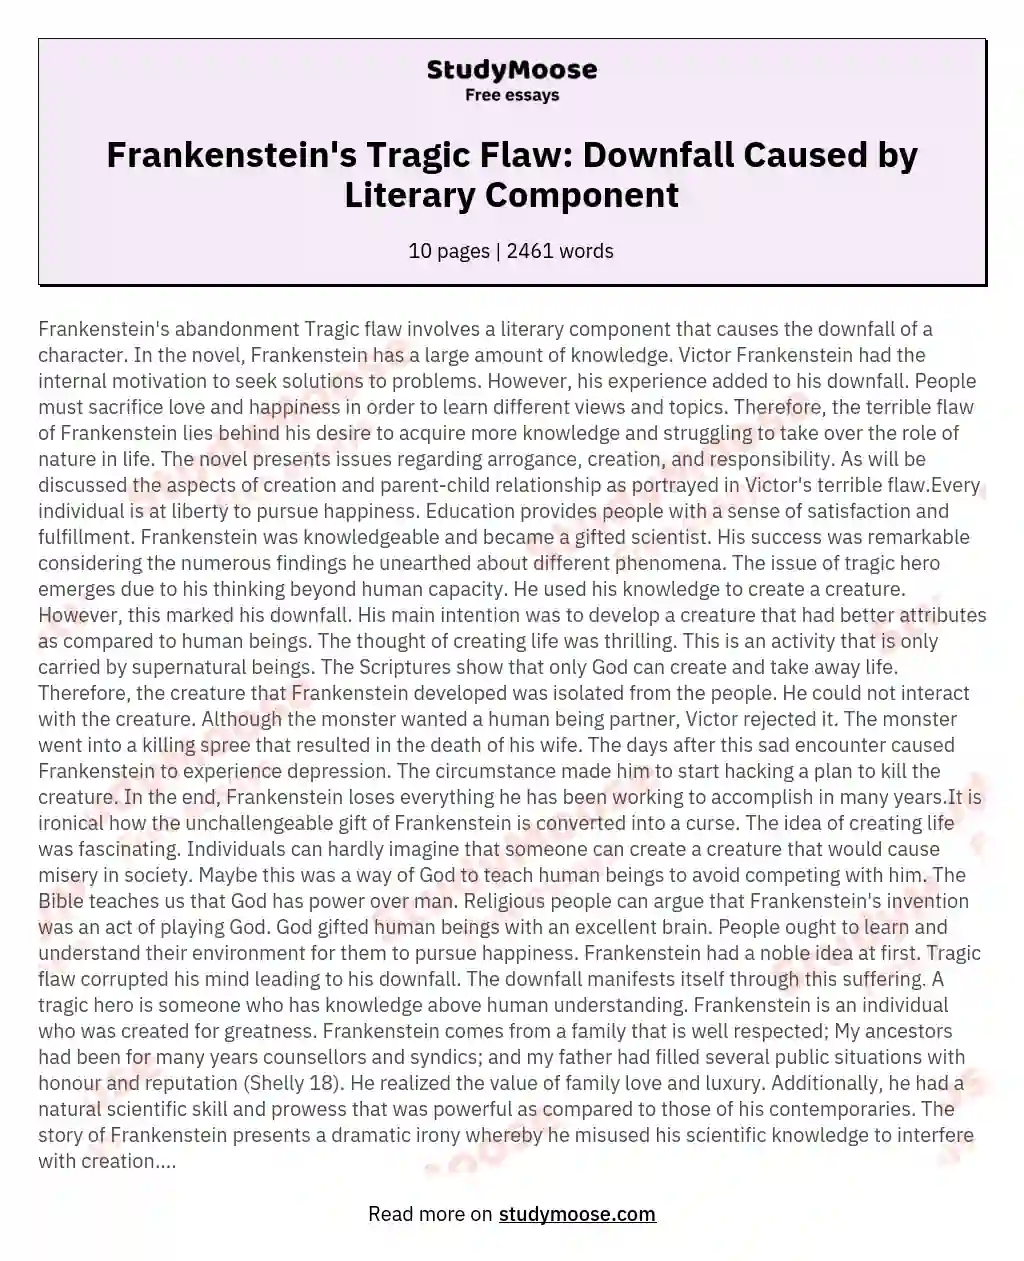 Frankenstein's Tragic Flaw: Downfall Caused by Literary Component